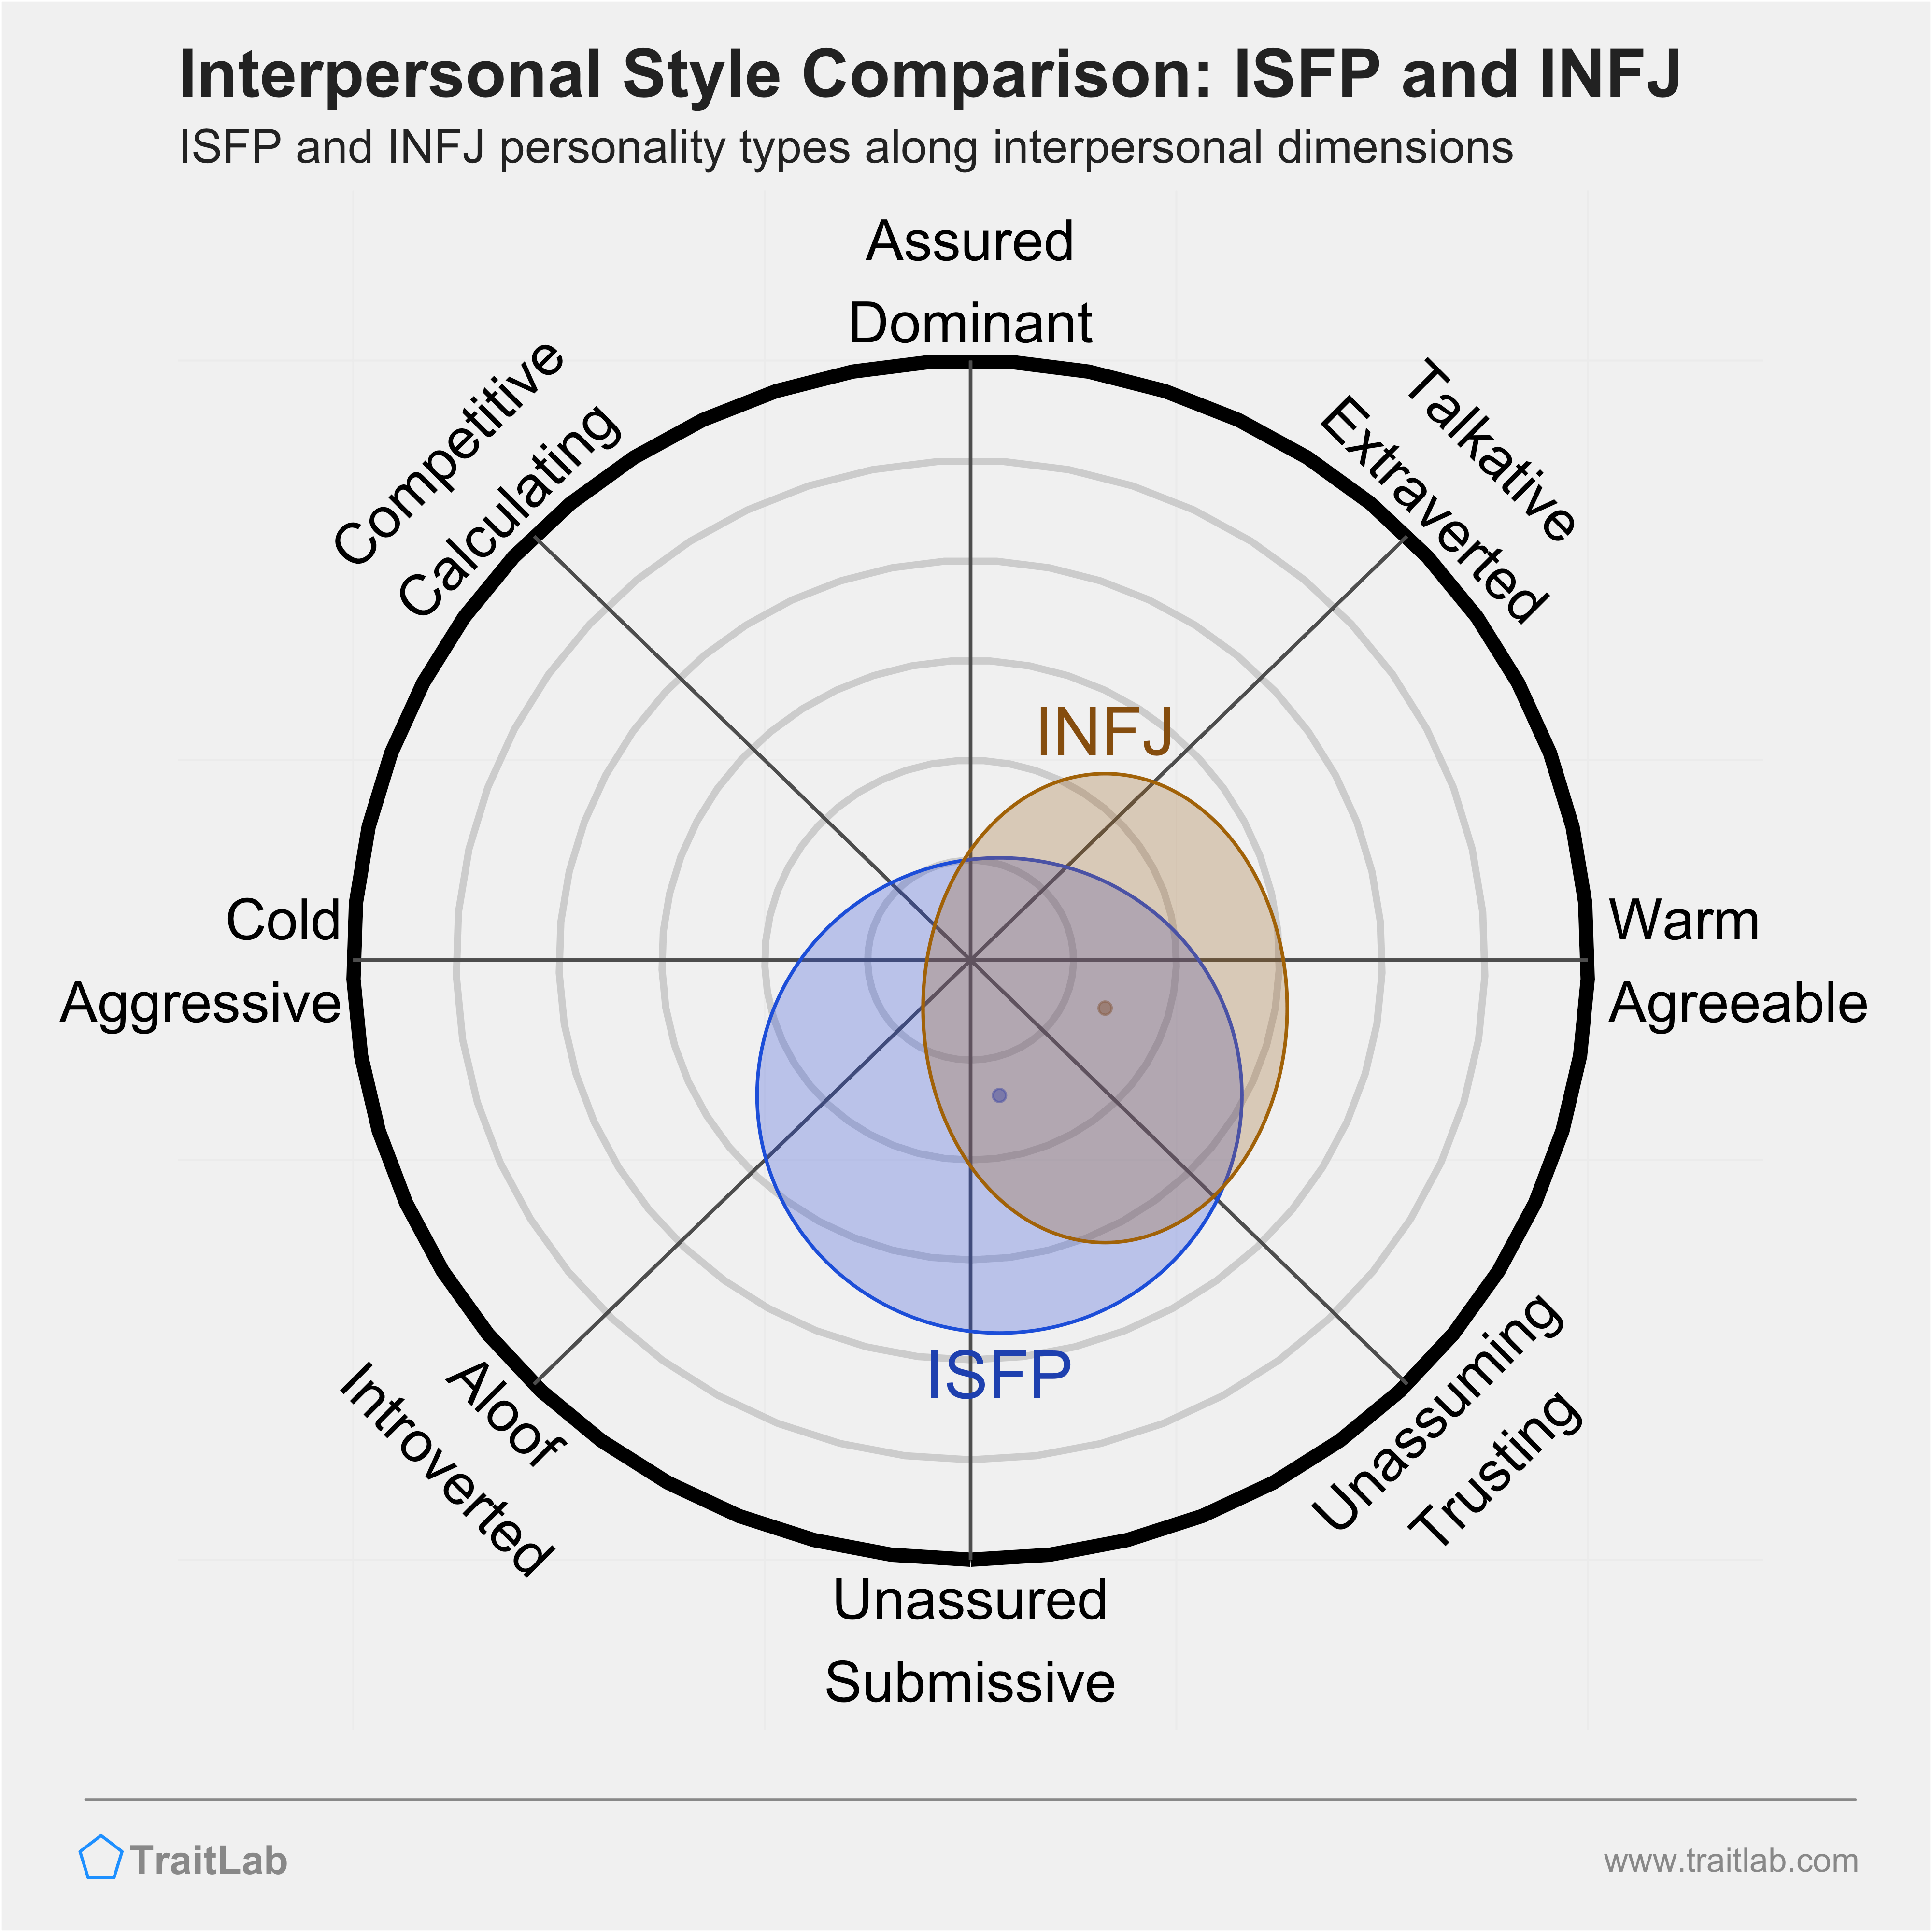 ISFP and INFJ comparison across interpersonal dimensions